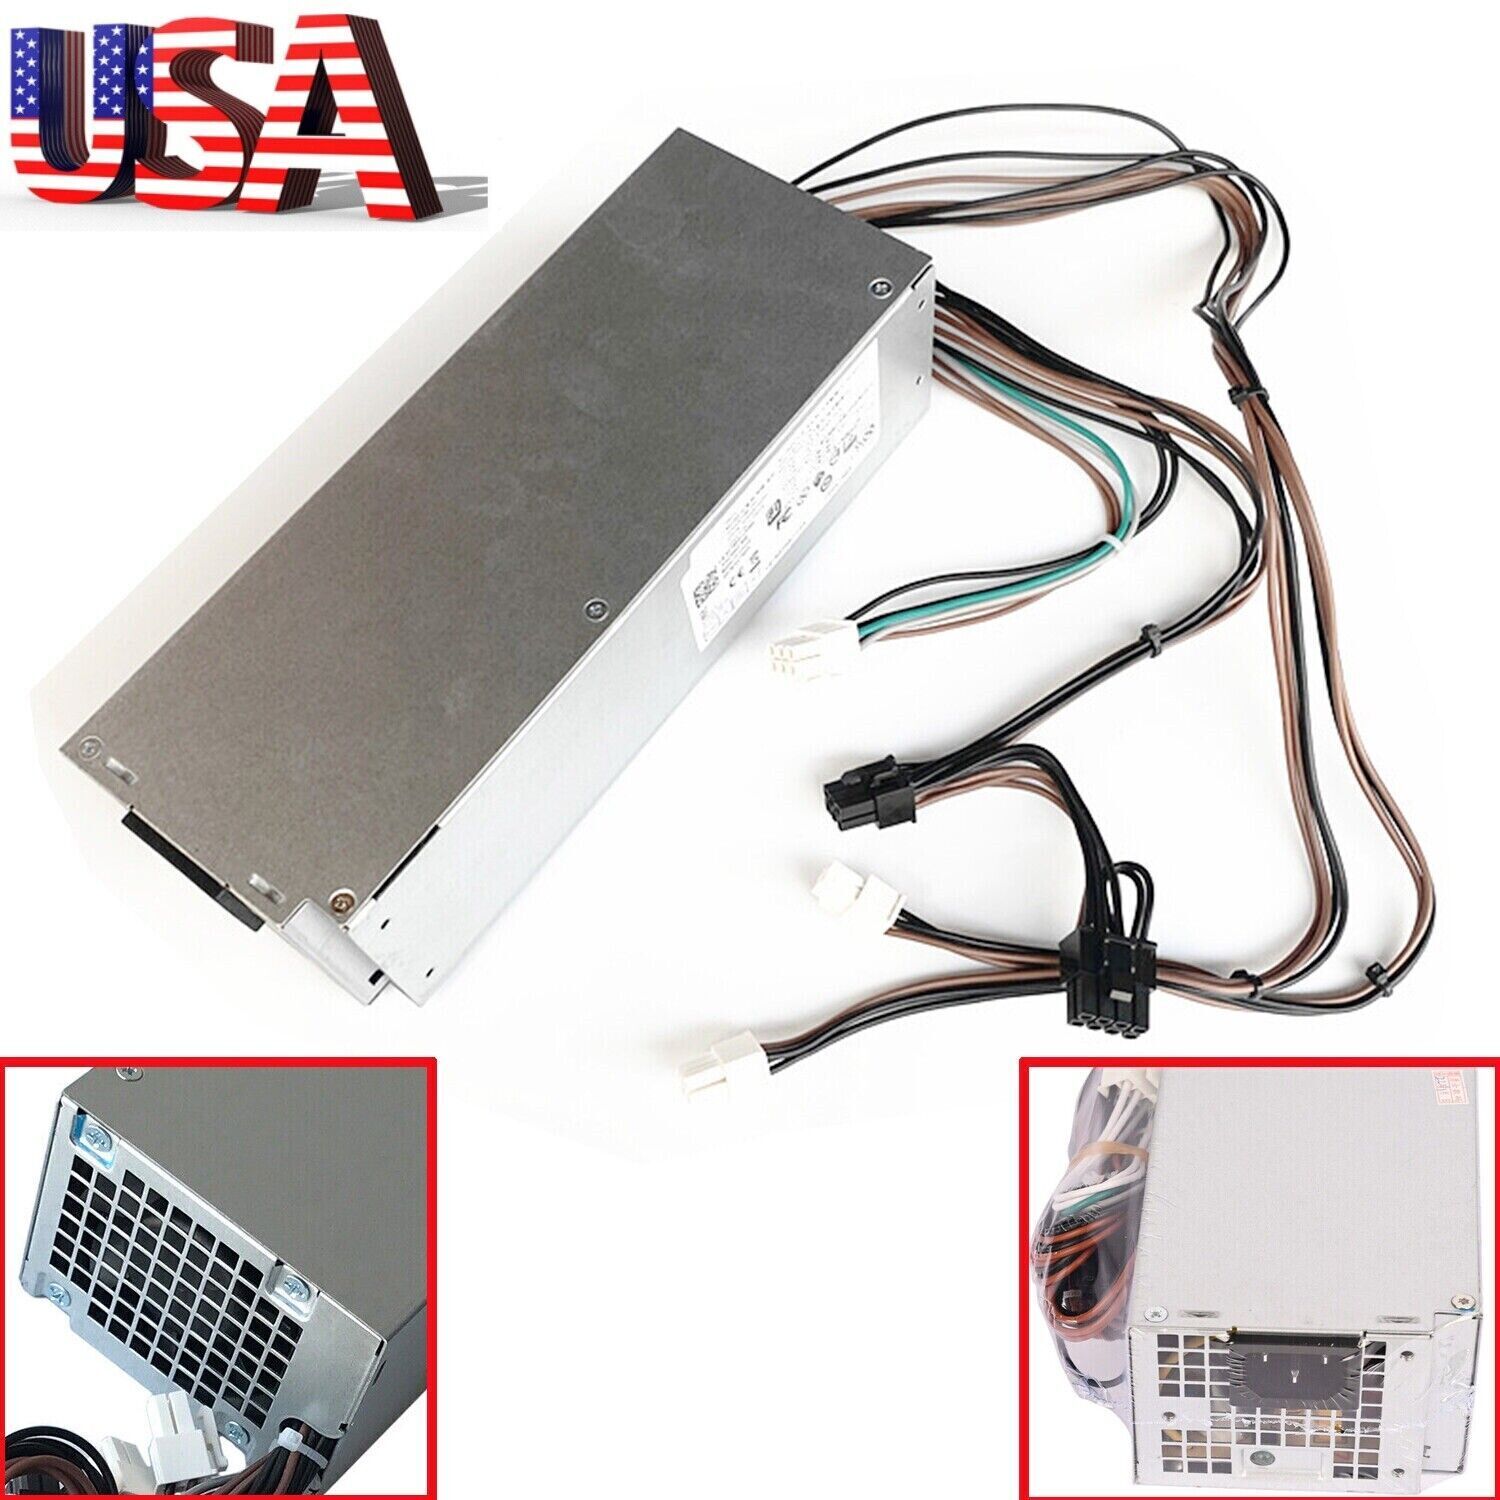 Power Supply PSU For Dell G5 XPS 8940 7060 5060 G5-5090 500W H500EPM-00